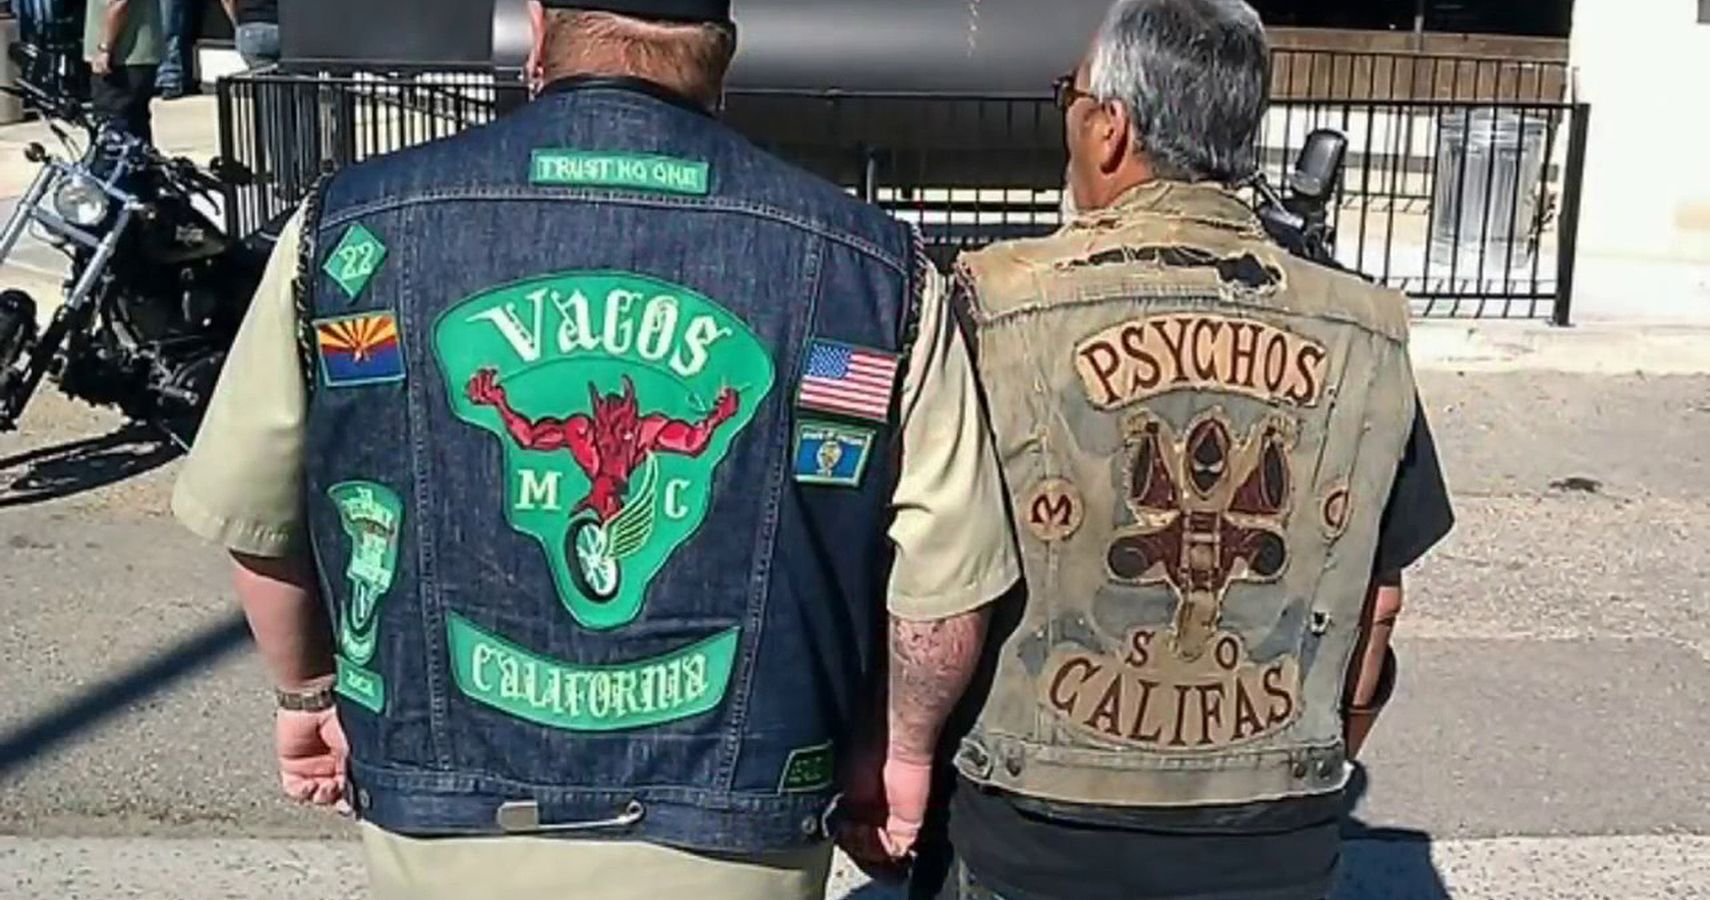 The Vagos MC Was Formed By Bitter Psycho MC Members